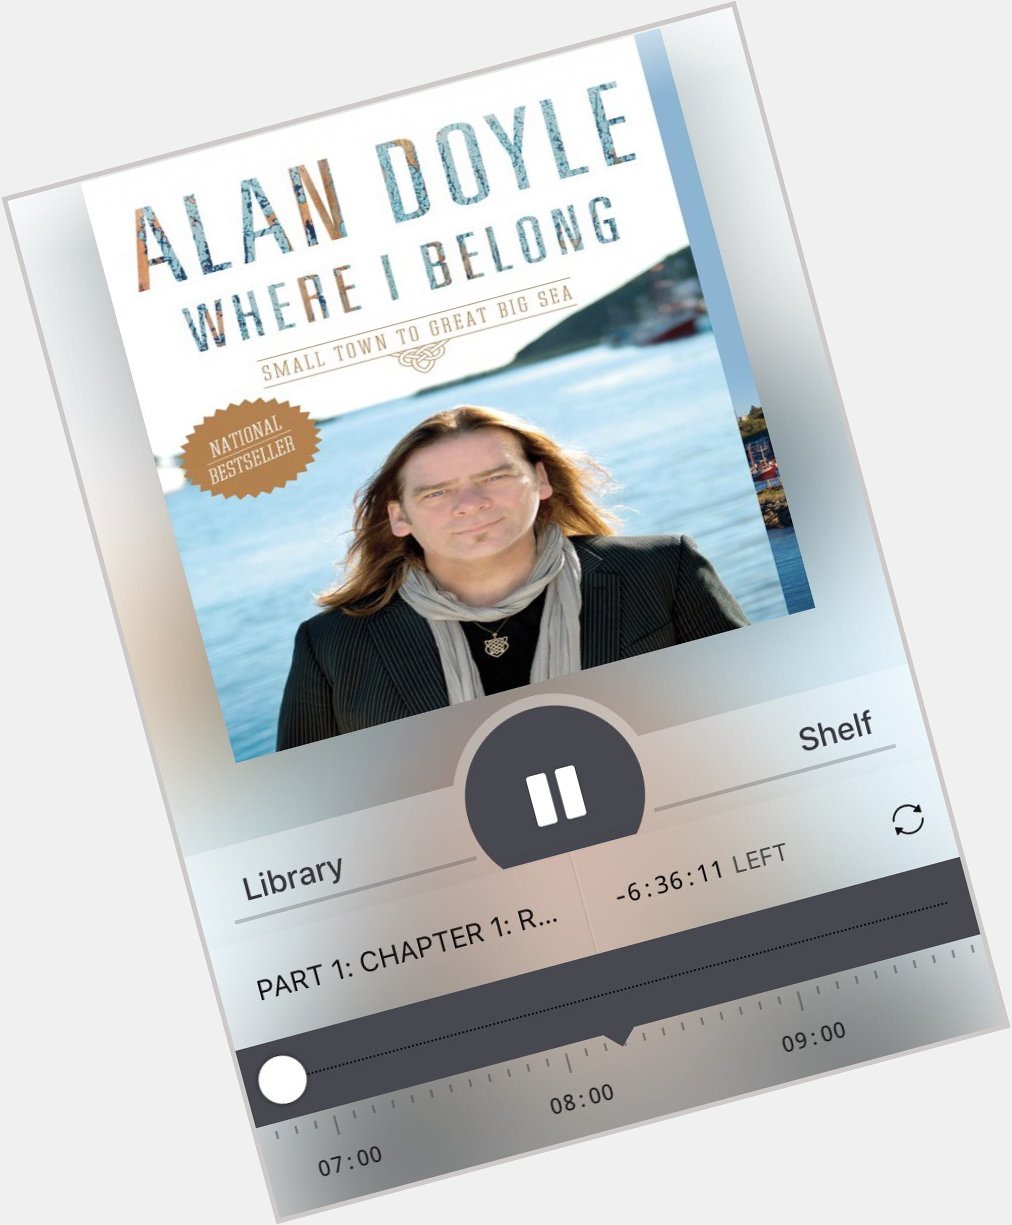 What a great day to start listening to Alan Doyle s audio book! Happy Birthday 